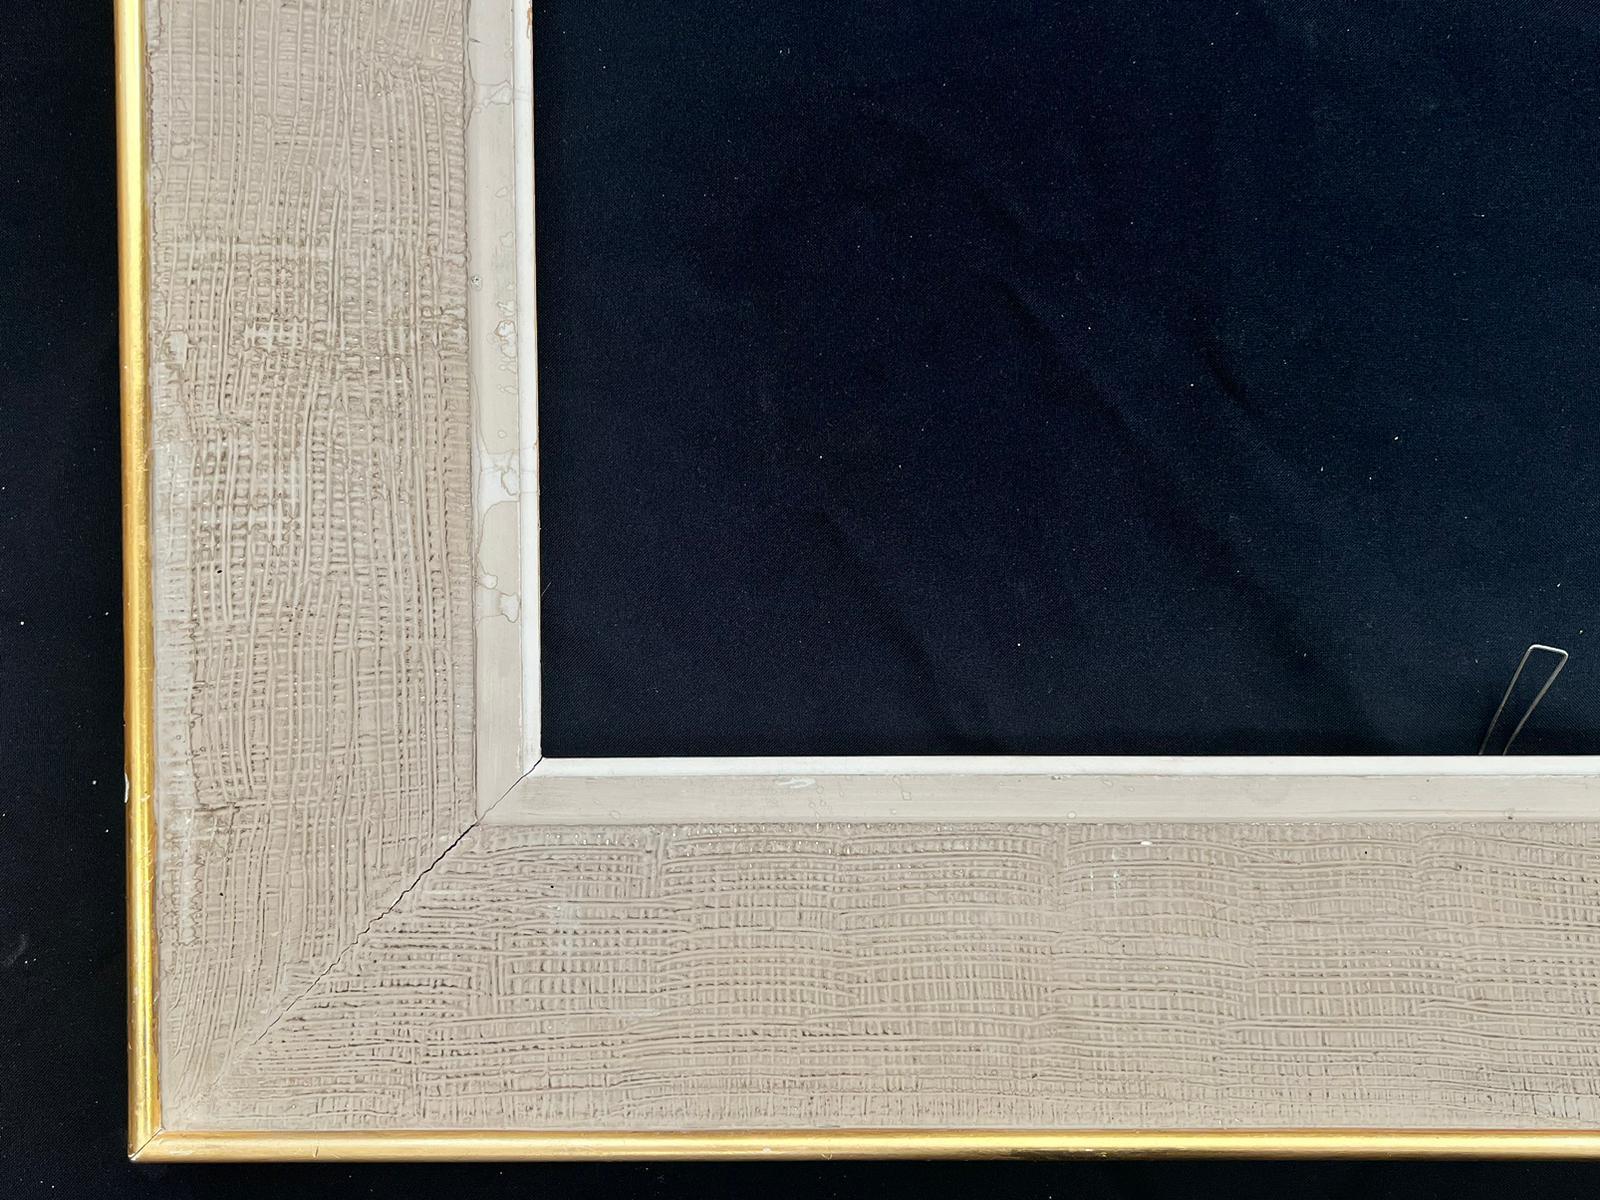 French mid 20th century picture frame

Internal measurement (to house painting or mirror): 13 x 18 inches
Overal outer measurements: 21.5 x 26 inches
Provenance: from a collection in Paris
Condition: all old picture frames are extremely fragile due